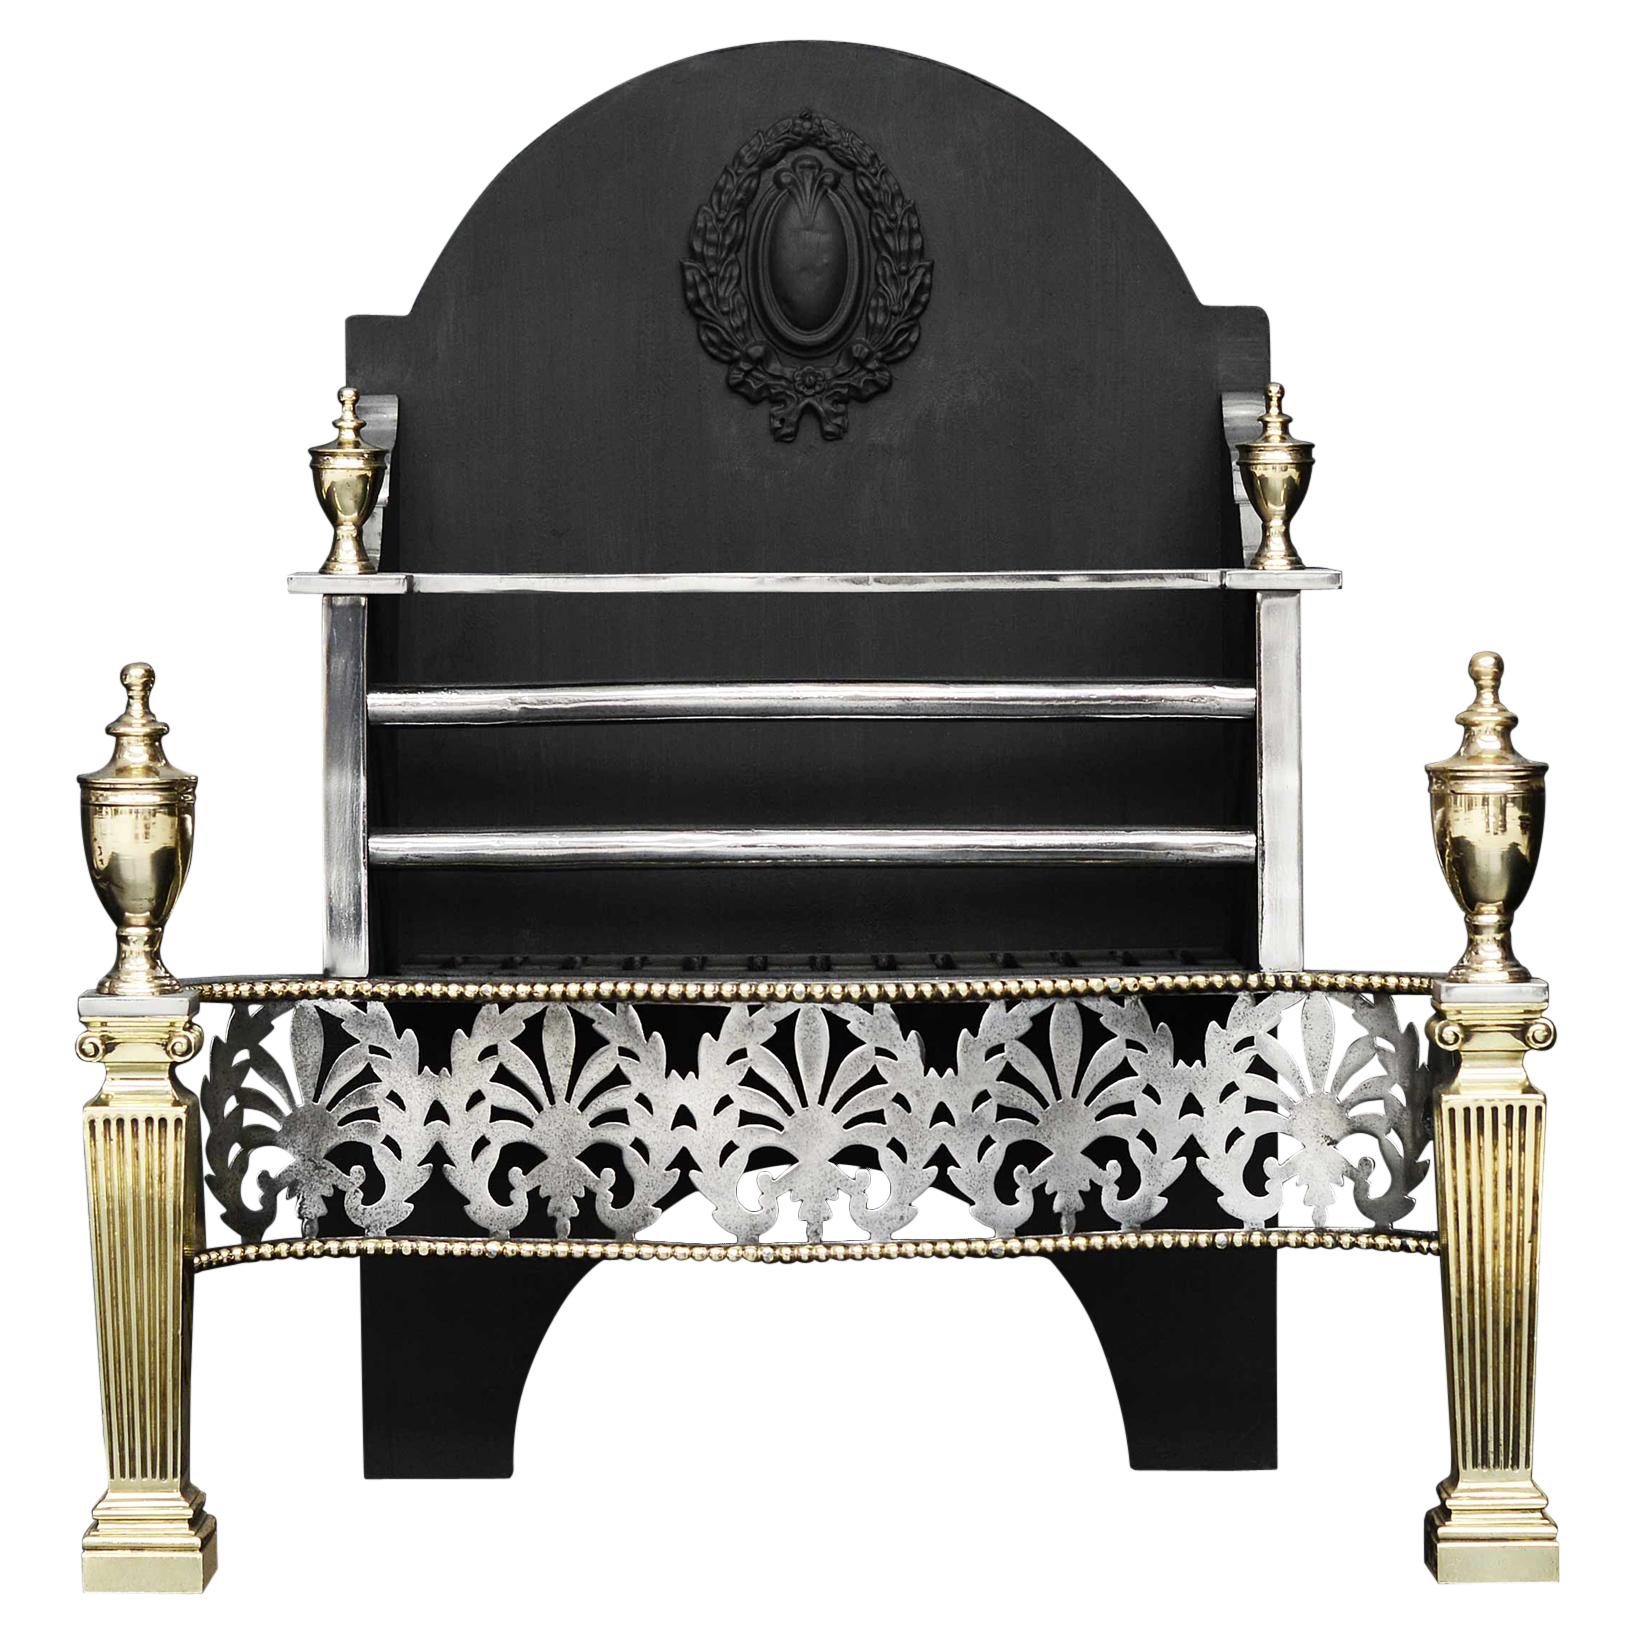 Brass & Steel Firebasket with Ionic Capitals